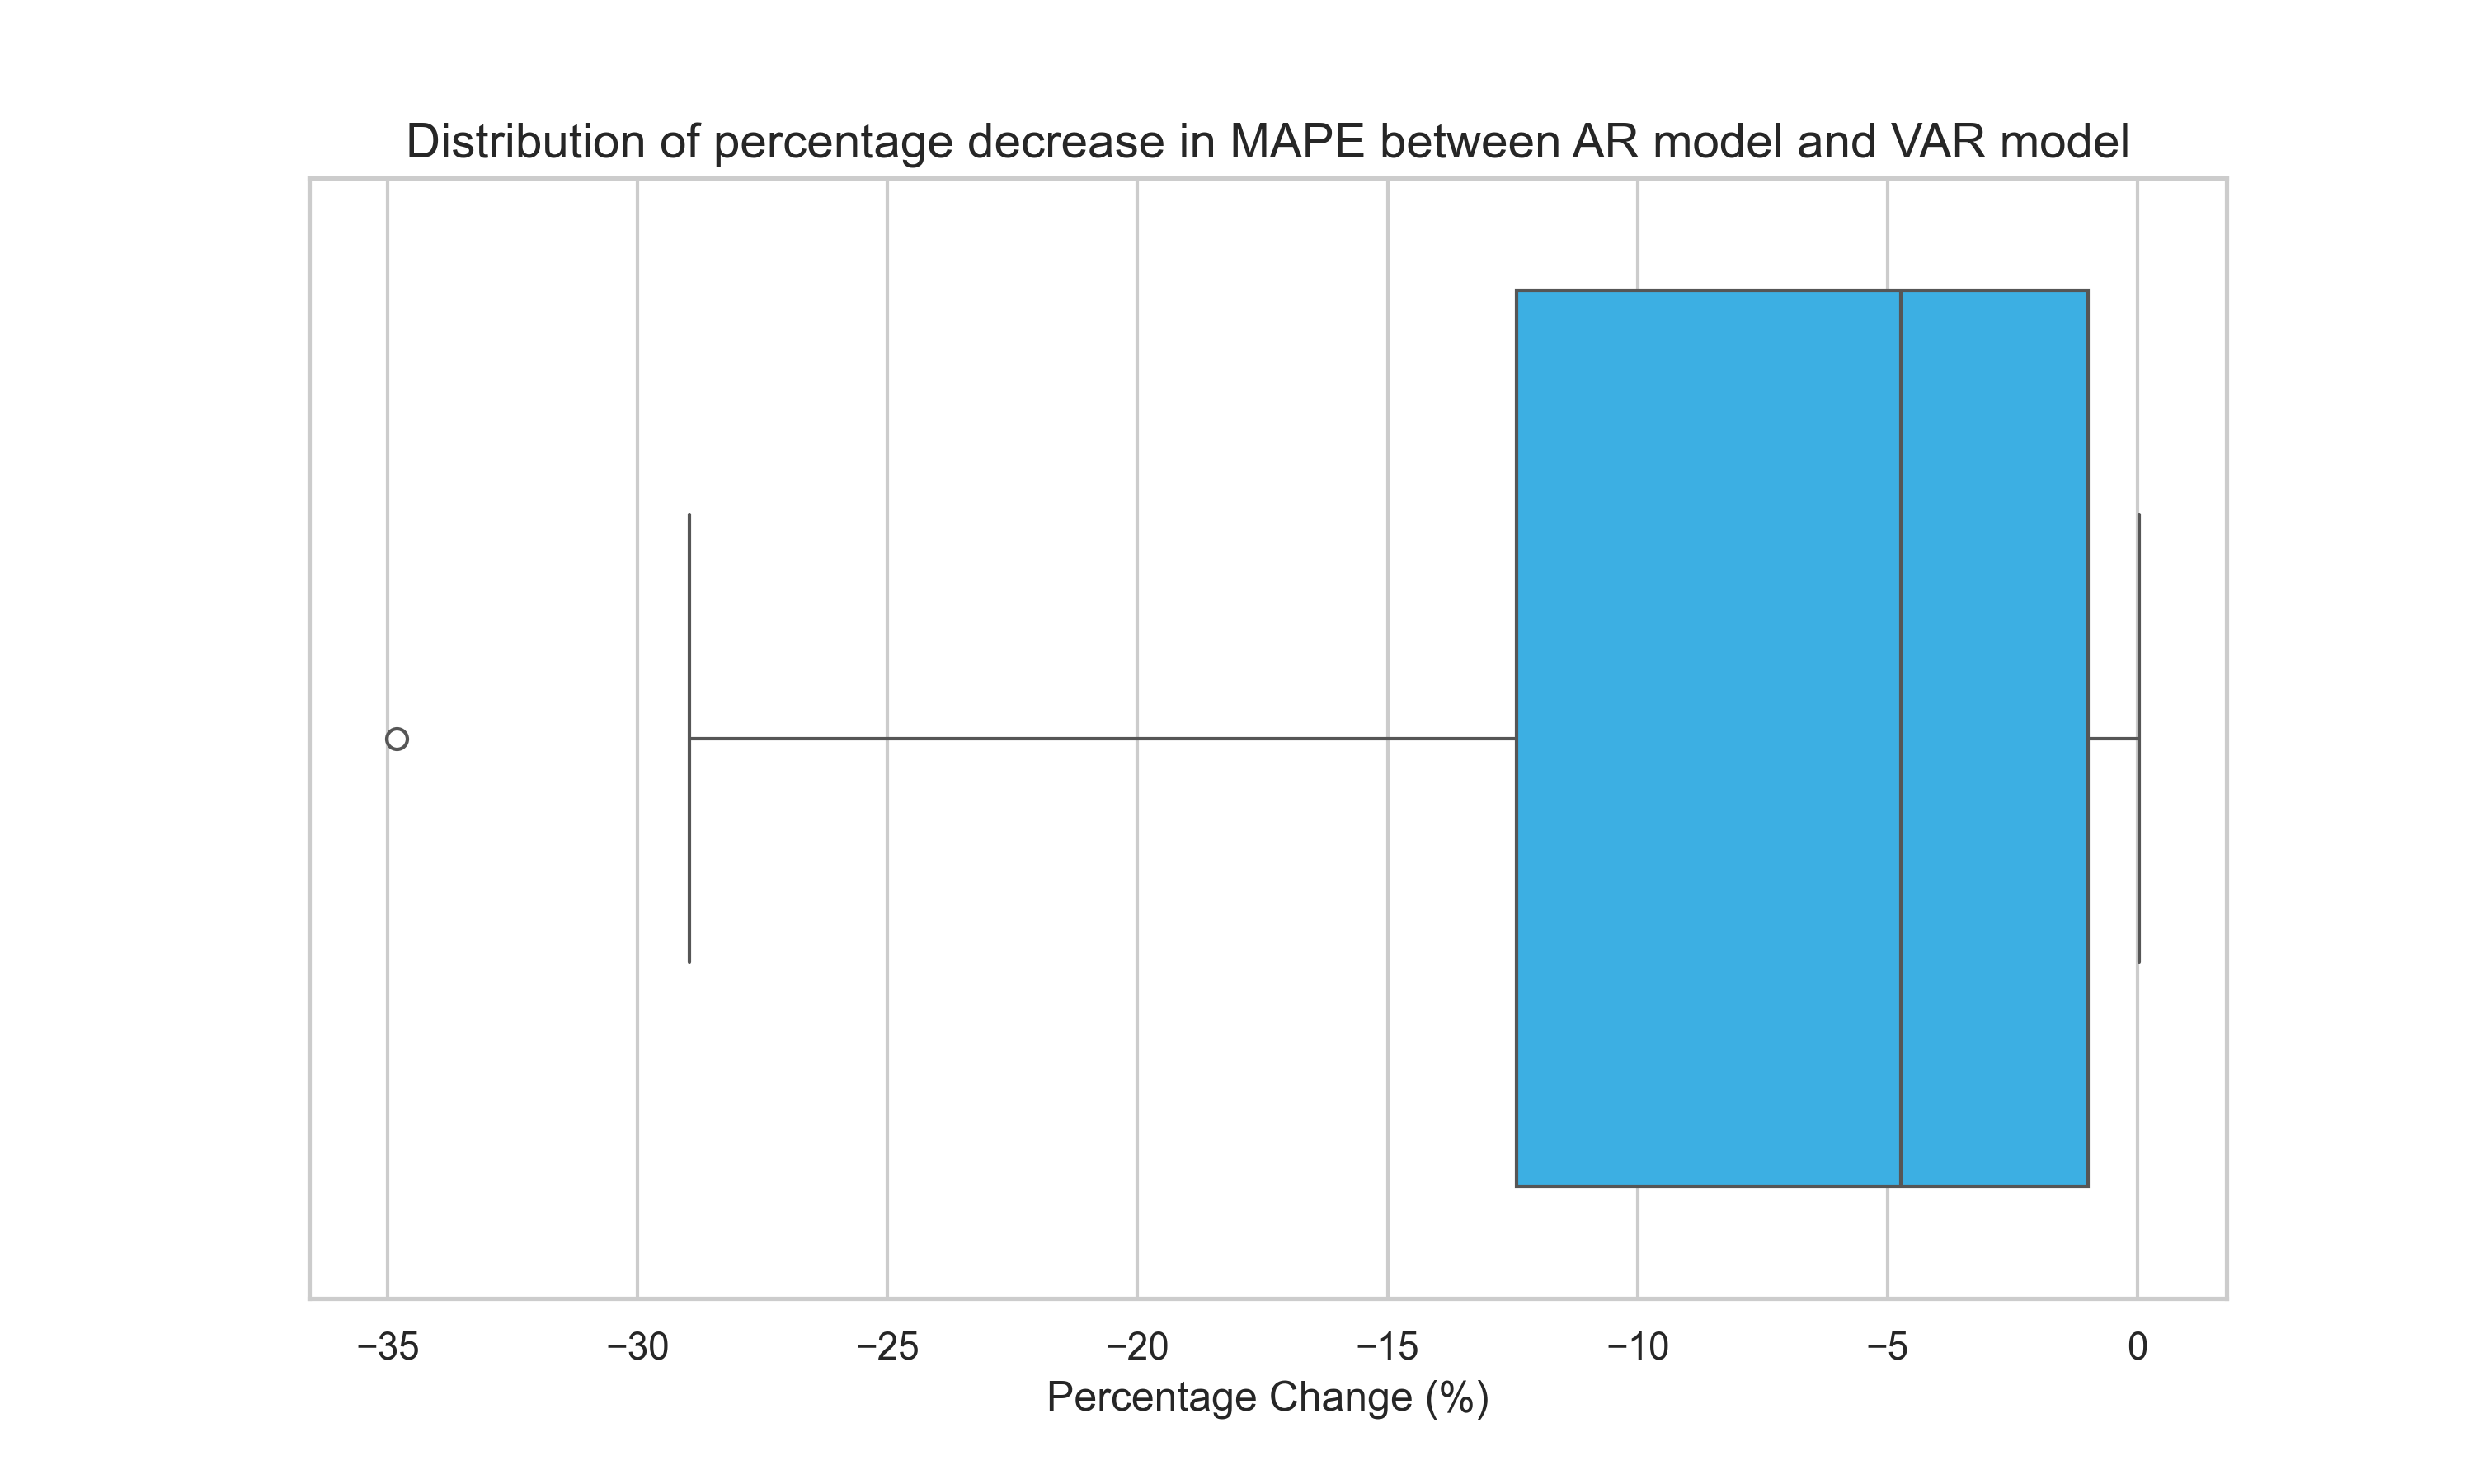 Figure 4: Distribution of percentage decrease in MAPE between AR model and VAR model with recommended covariate